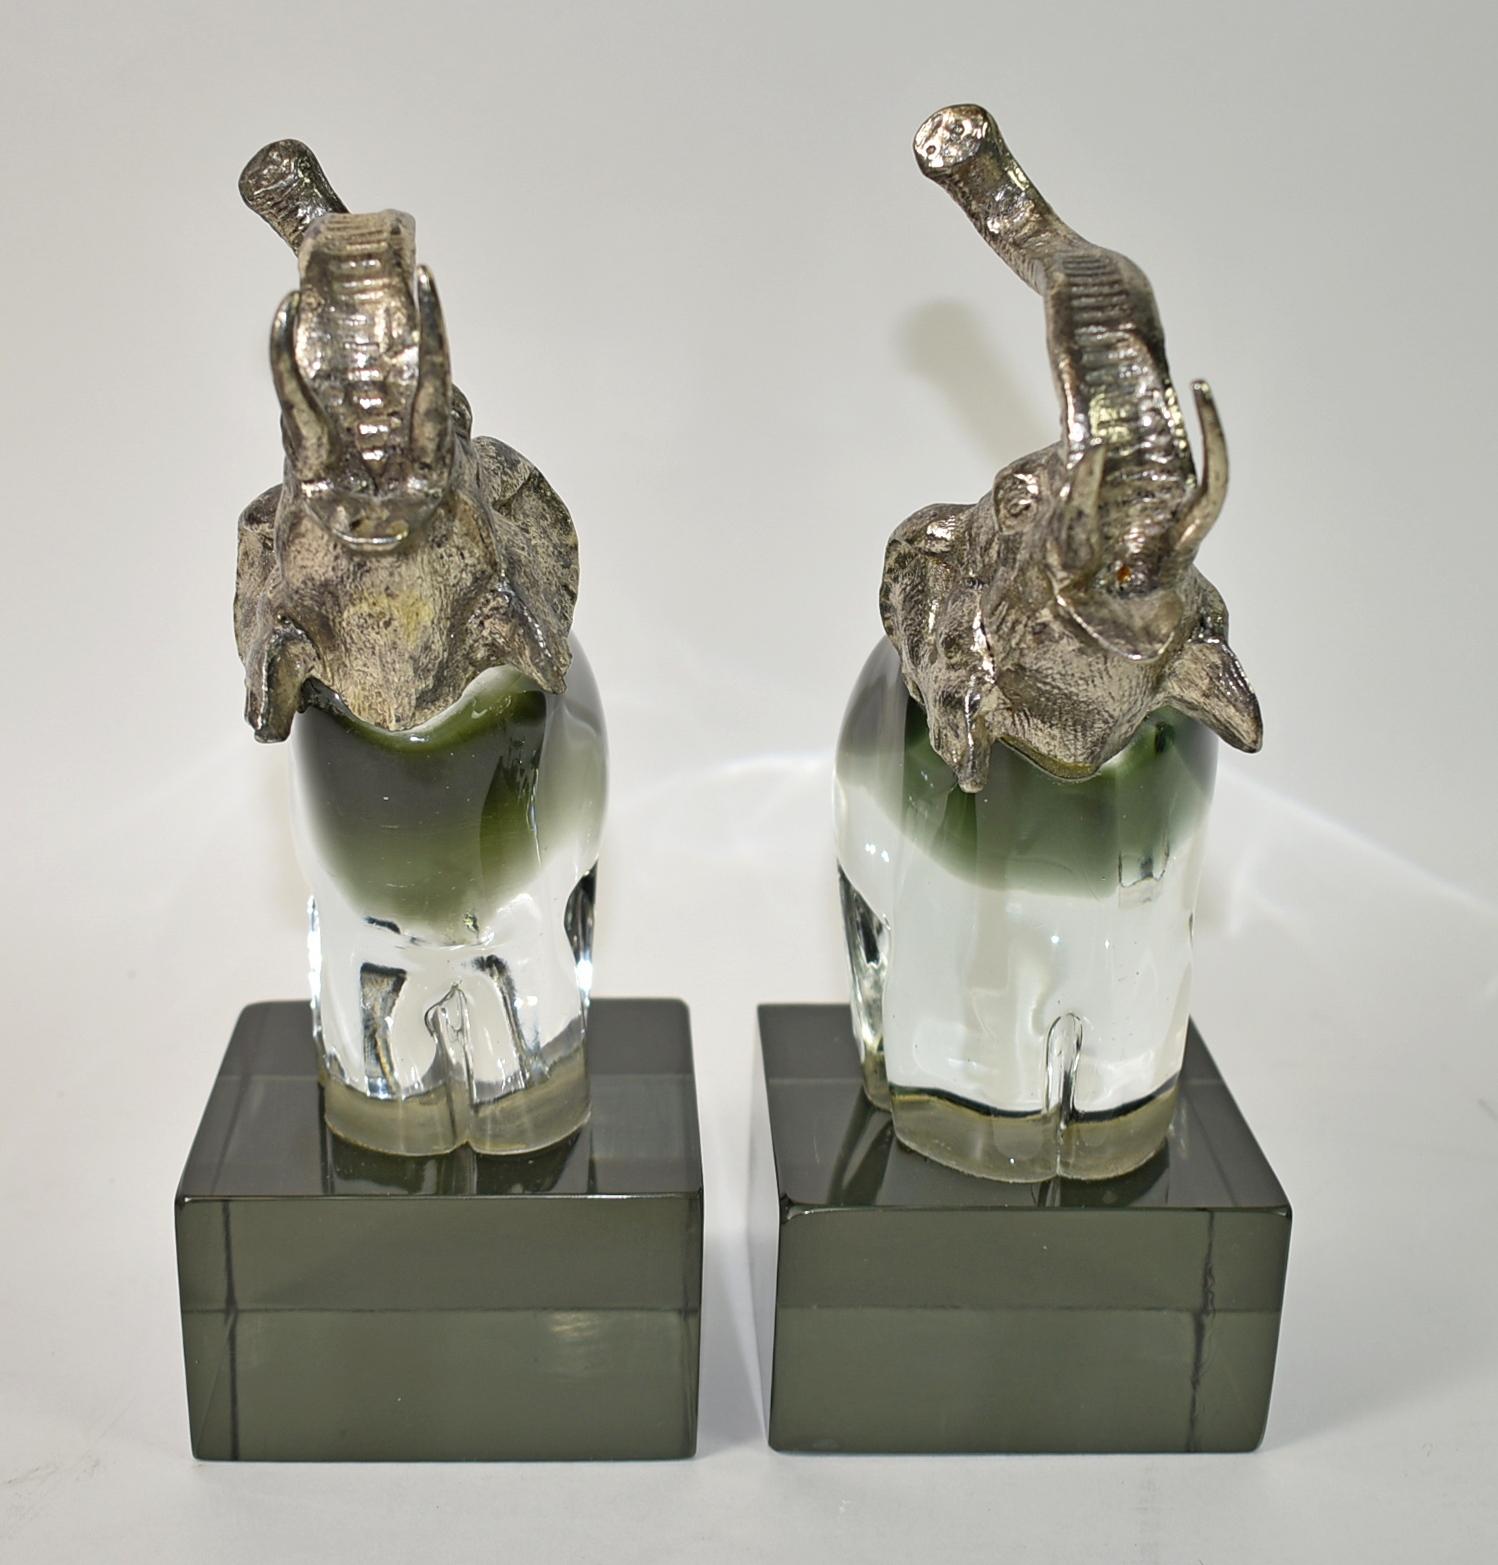 Pair of Art Glass Elephant Bookends. Metal heads and smoky and clear glass bases. Not signed but in the style of Murano. Excellent Vintage condition, no chips or cracks, very heavy, some wear to bottom consistent with usage and age. Dimensions: 9.5